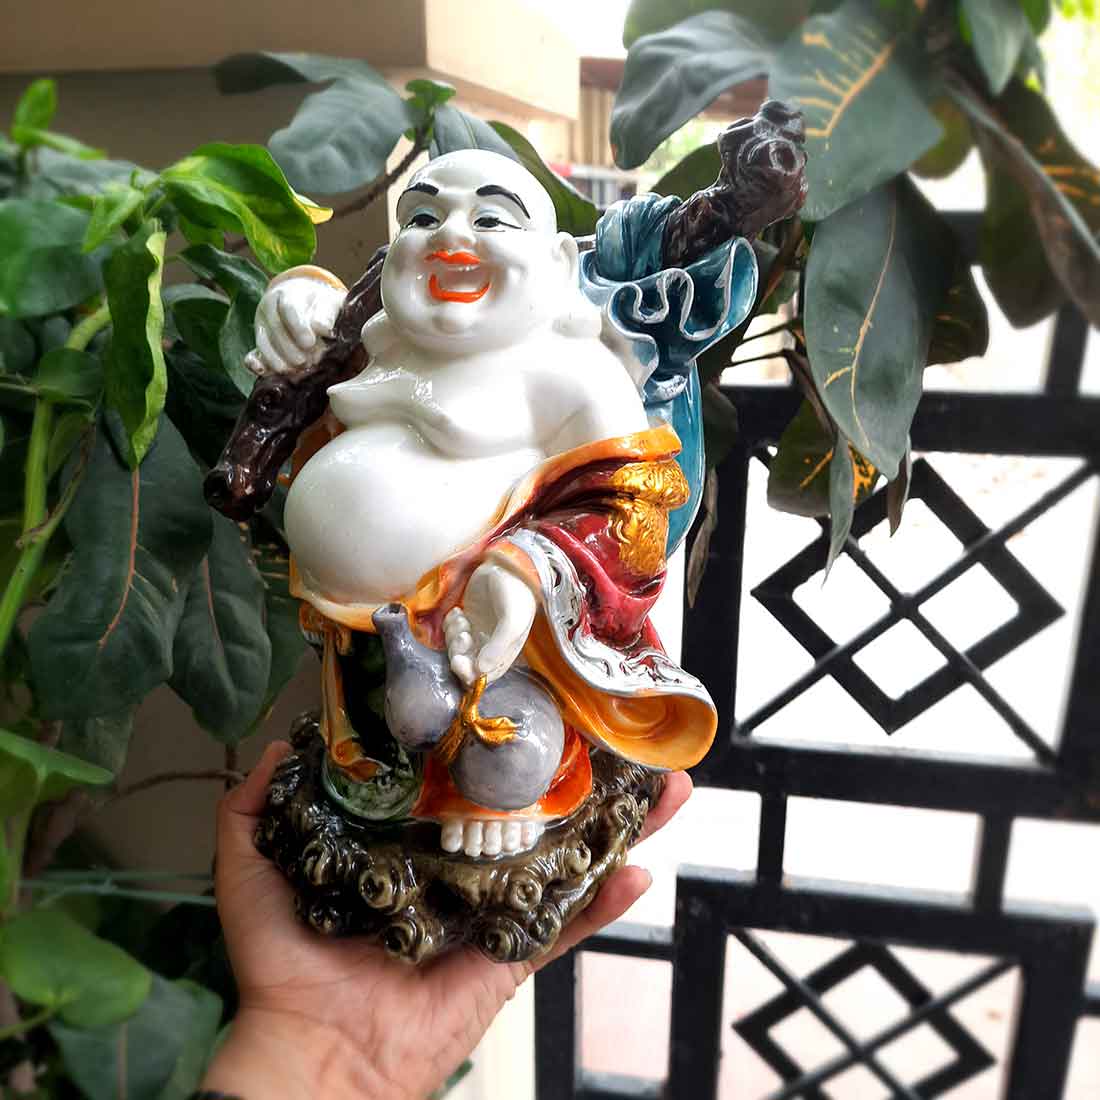 Can I buy Laughing Buddha for myself? - Quora